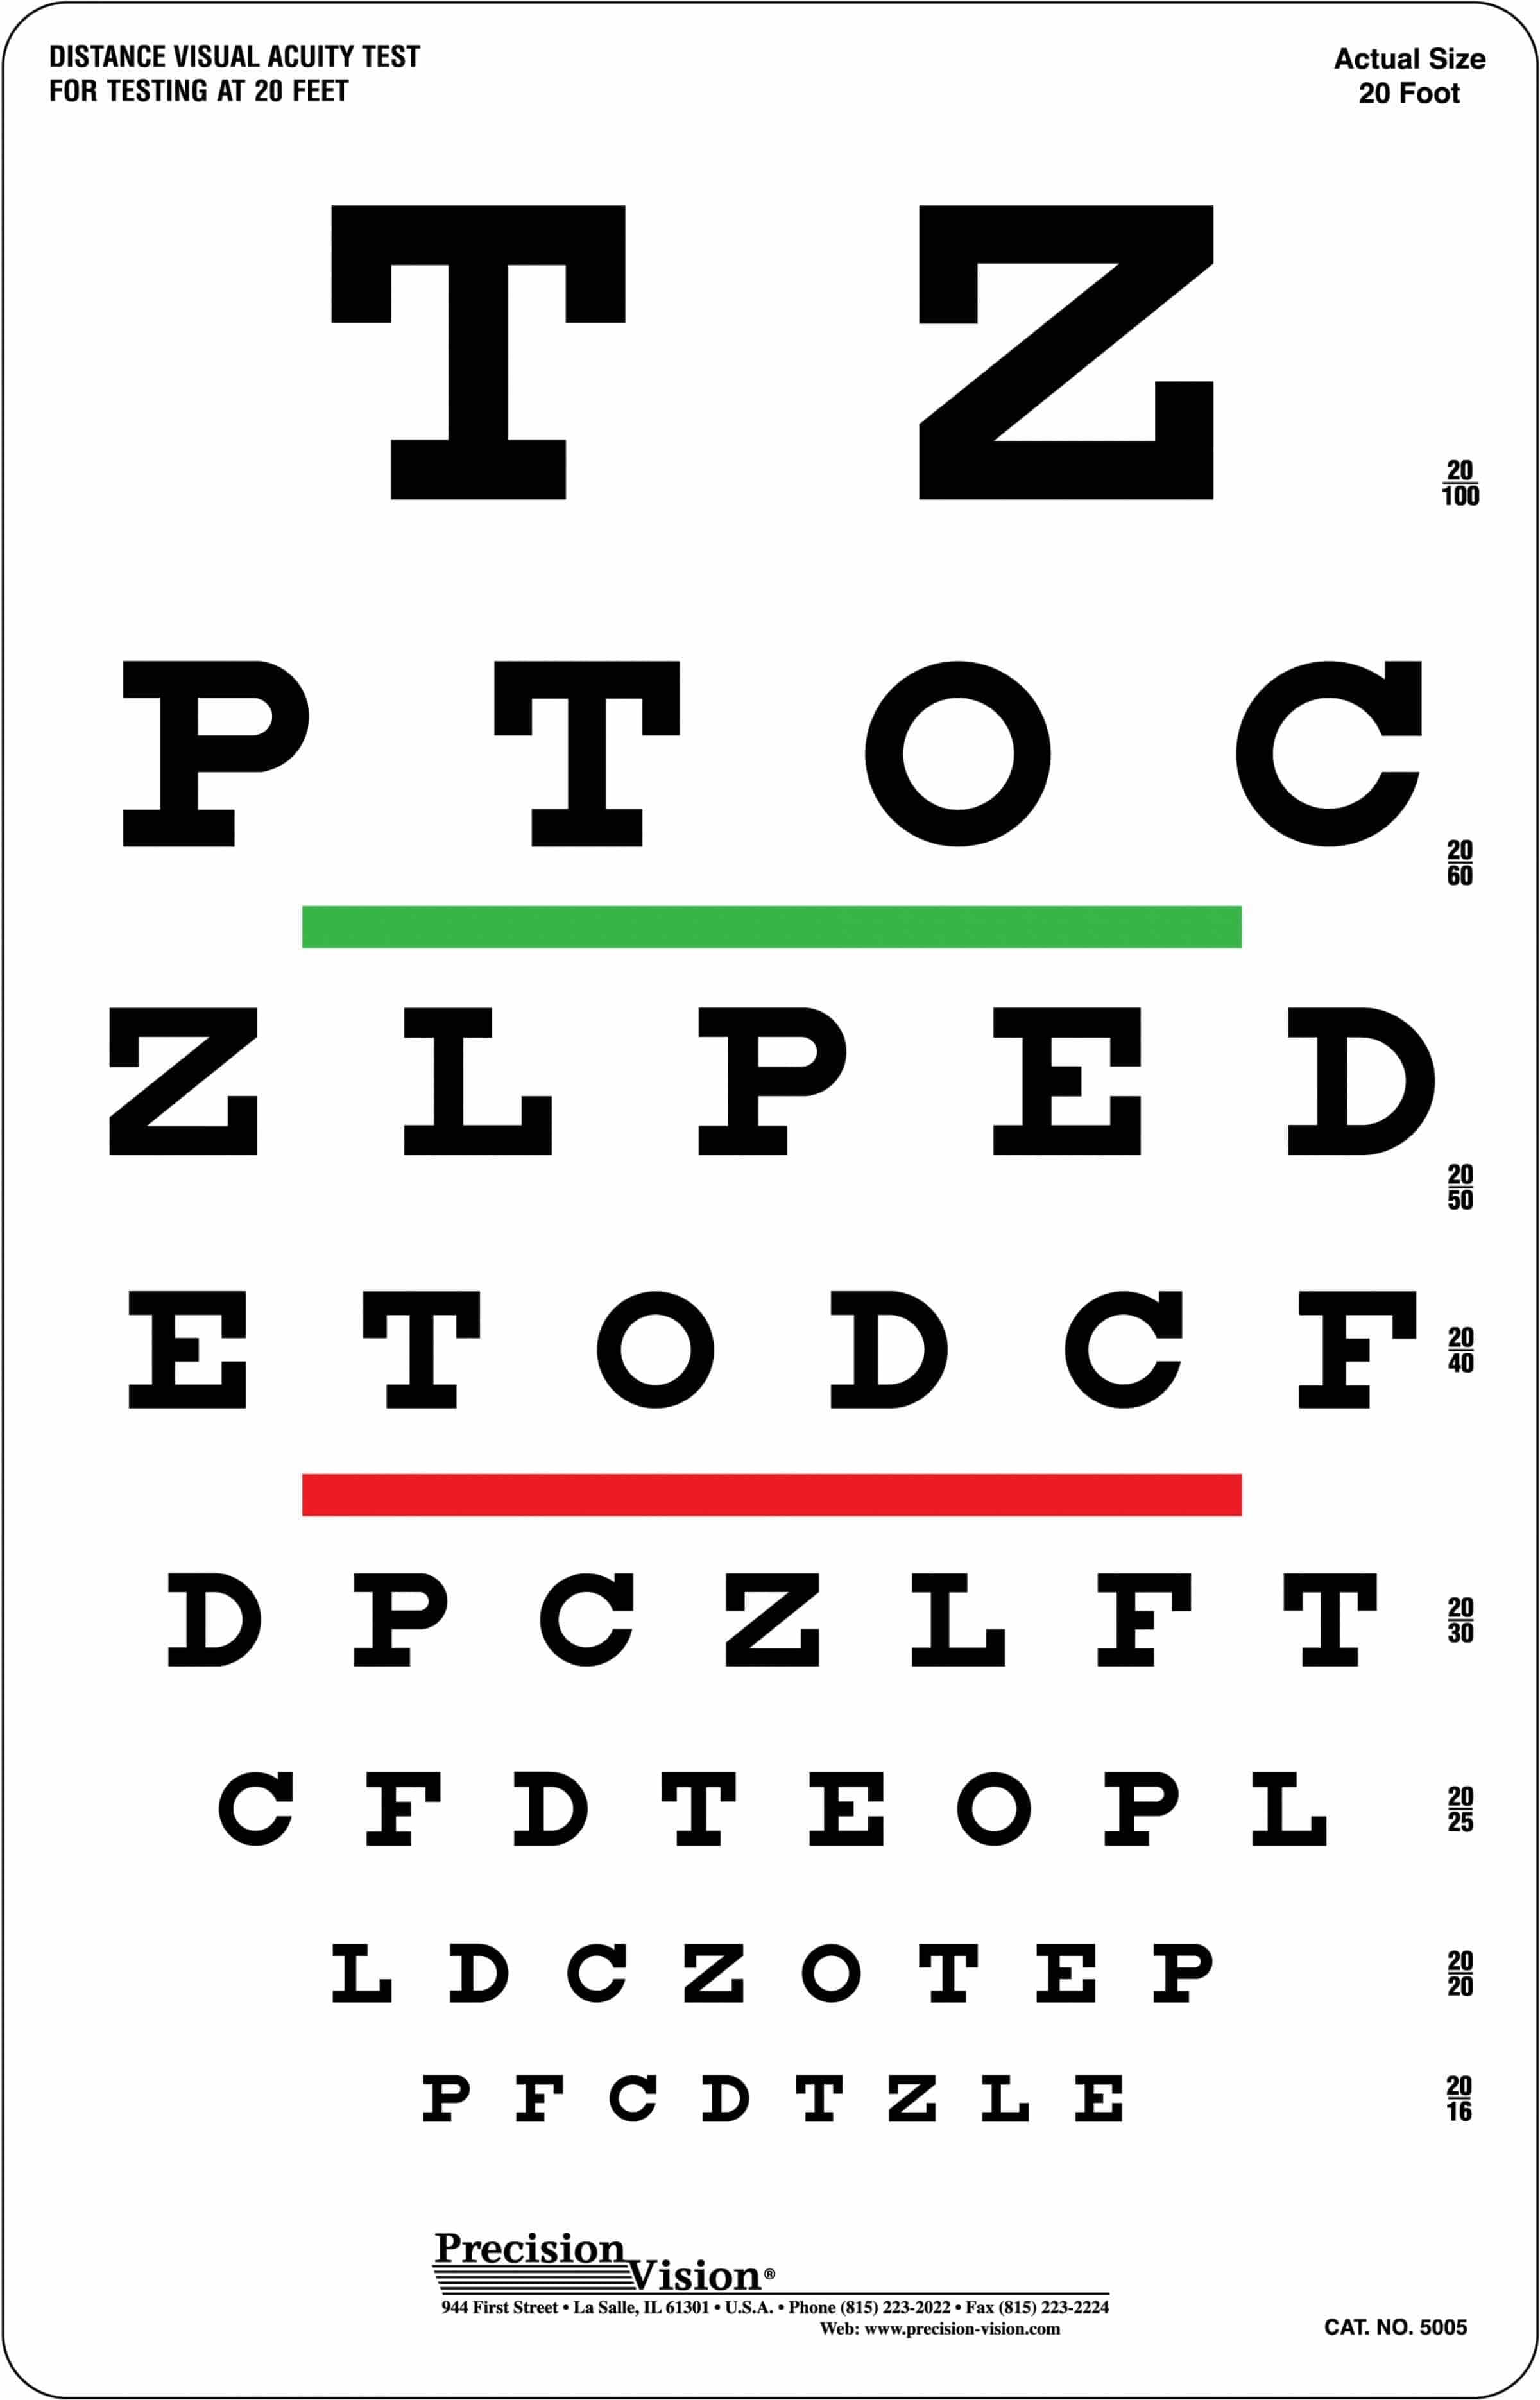 snellen-eye-chart-for-visual-acuity-and-color-vision-test-precision-huge-eye-chart-new2-david